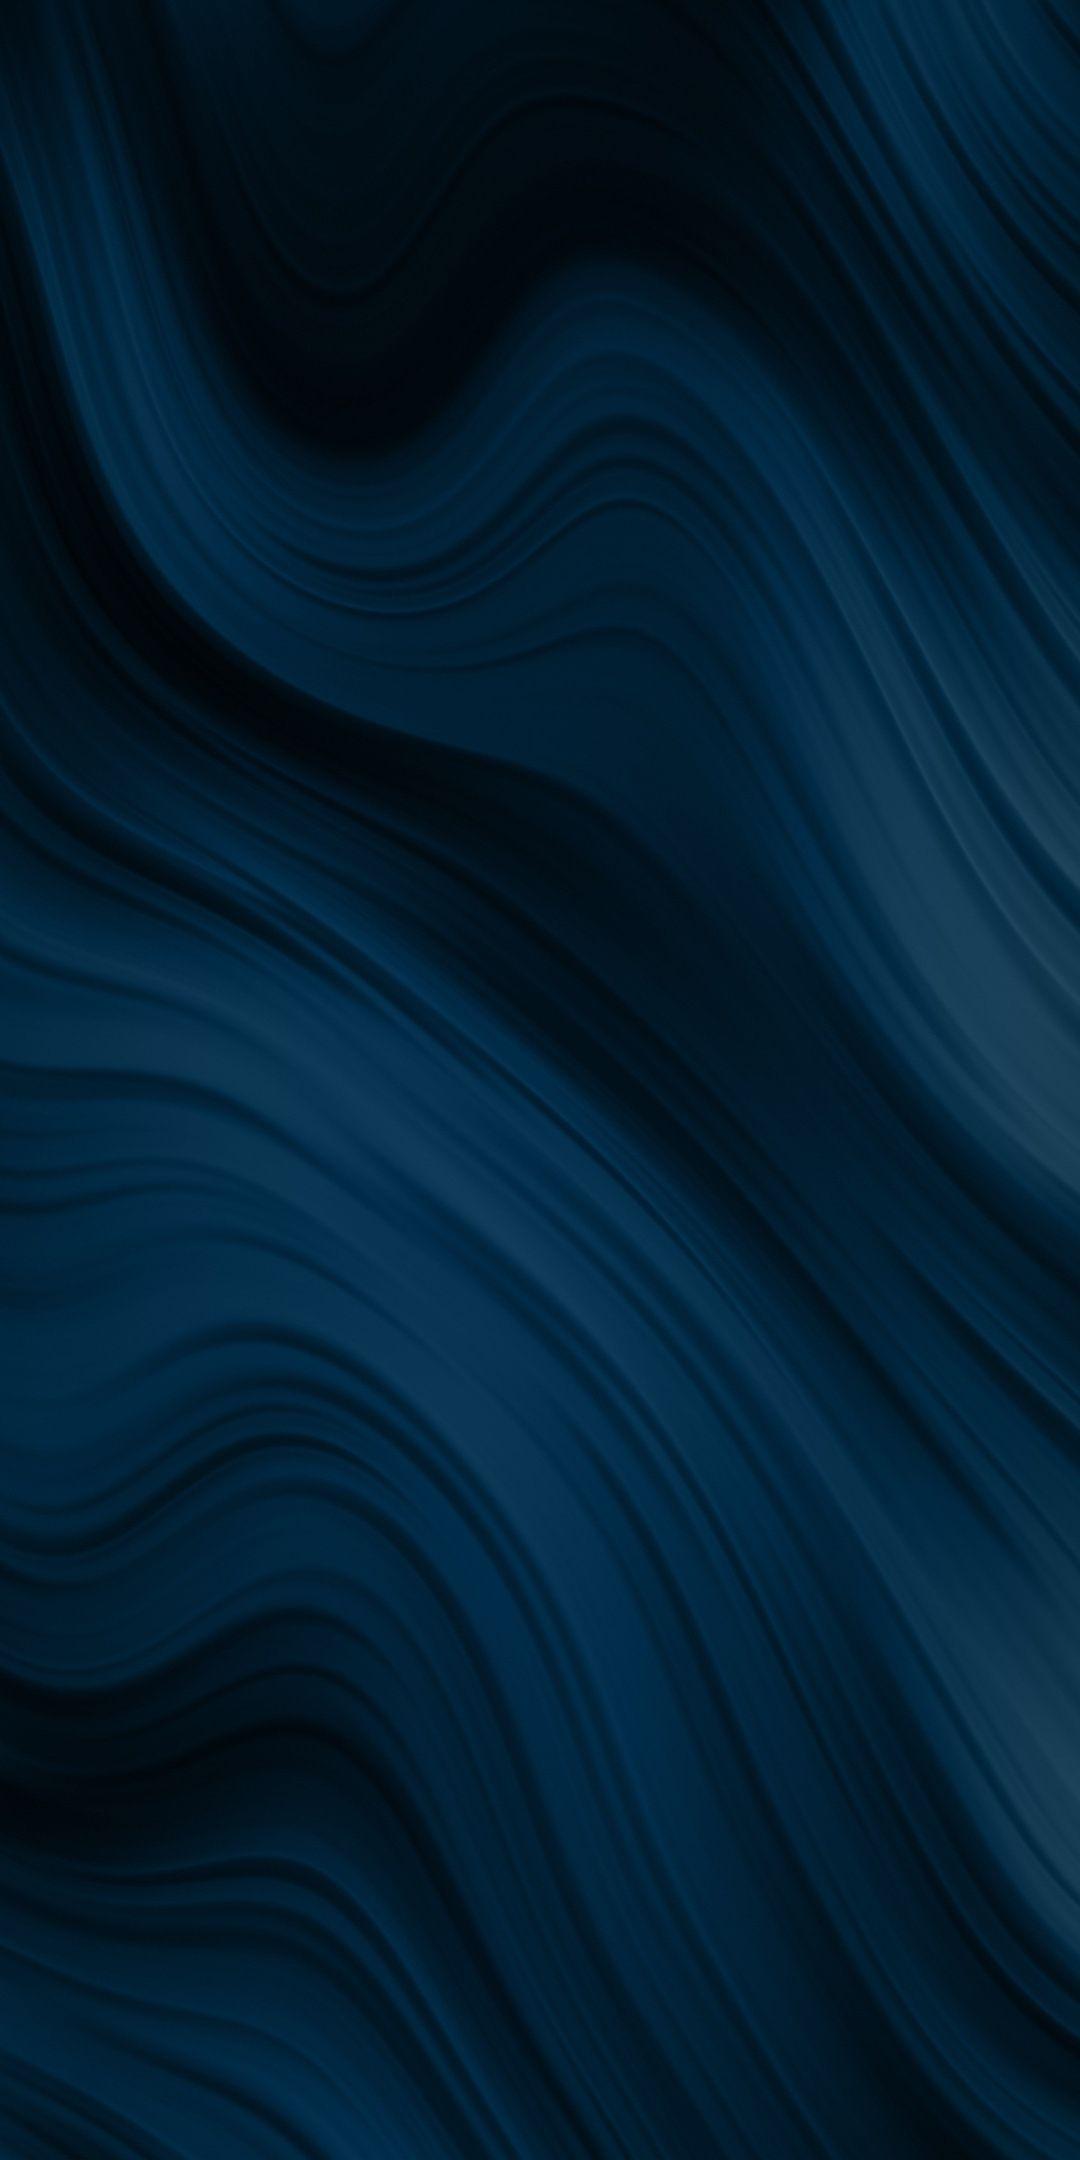 Dark Blue Ombre Wallpapers - Top Free Dark Blue Ombre Backgrounds